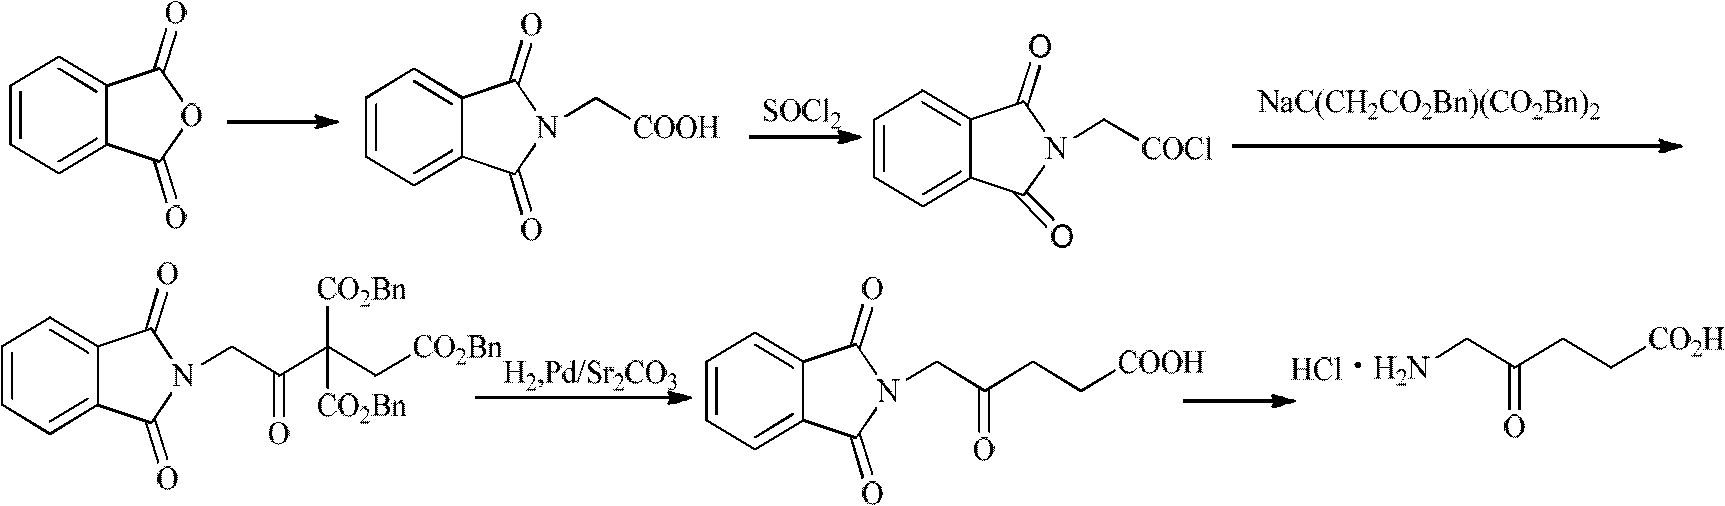 Synthesis method for 5-aminolevulinic acid hydrochloride